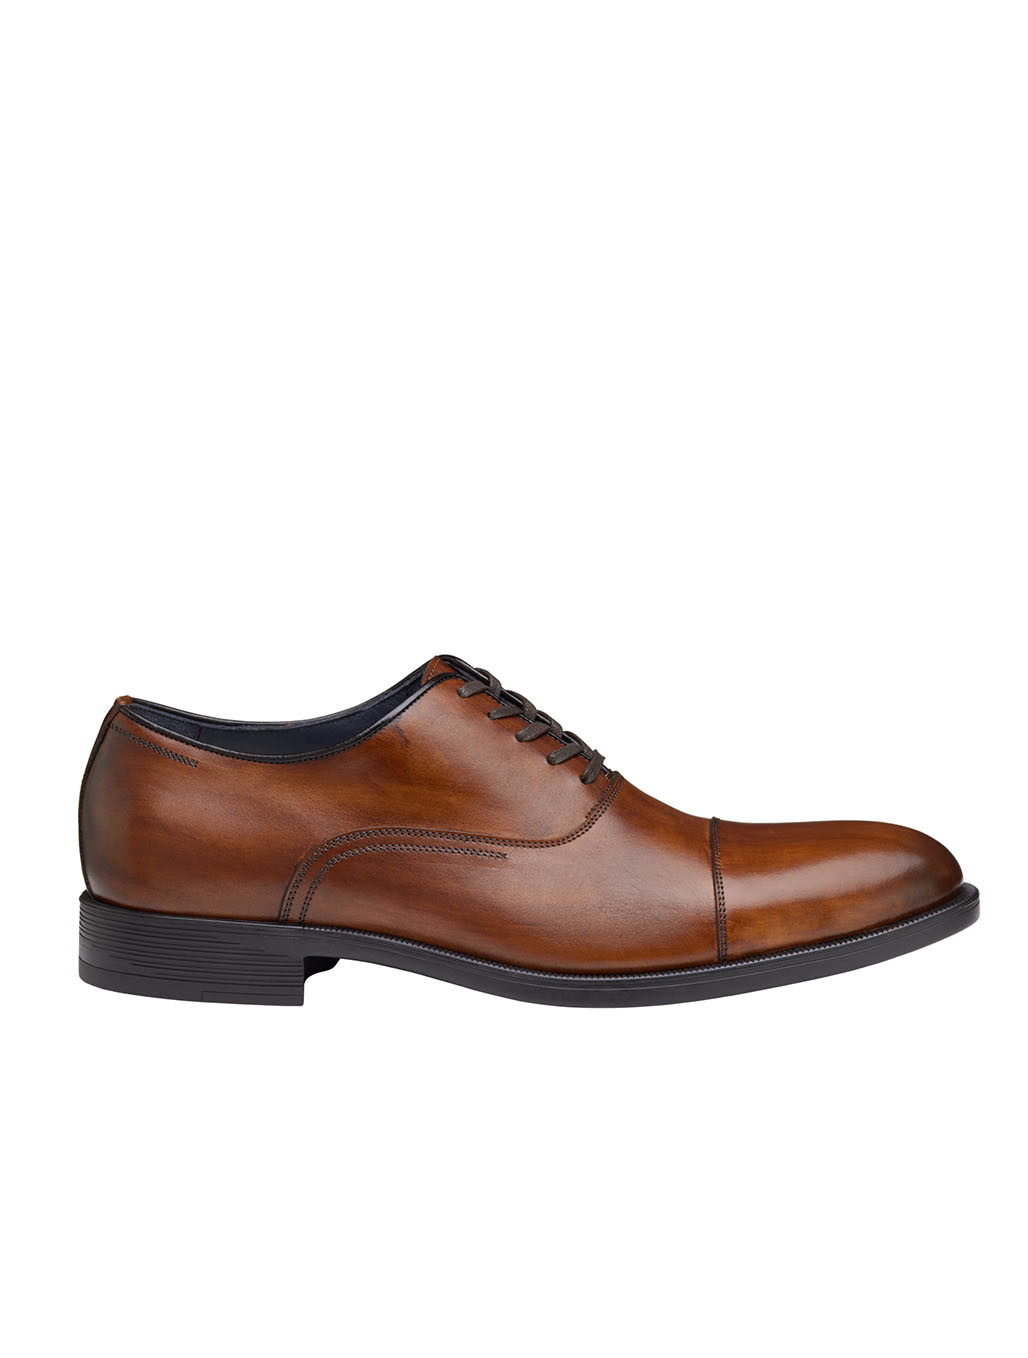 Flynch Cap Toe Johnston & Murphy Collection 24-6332